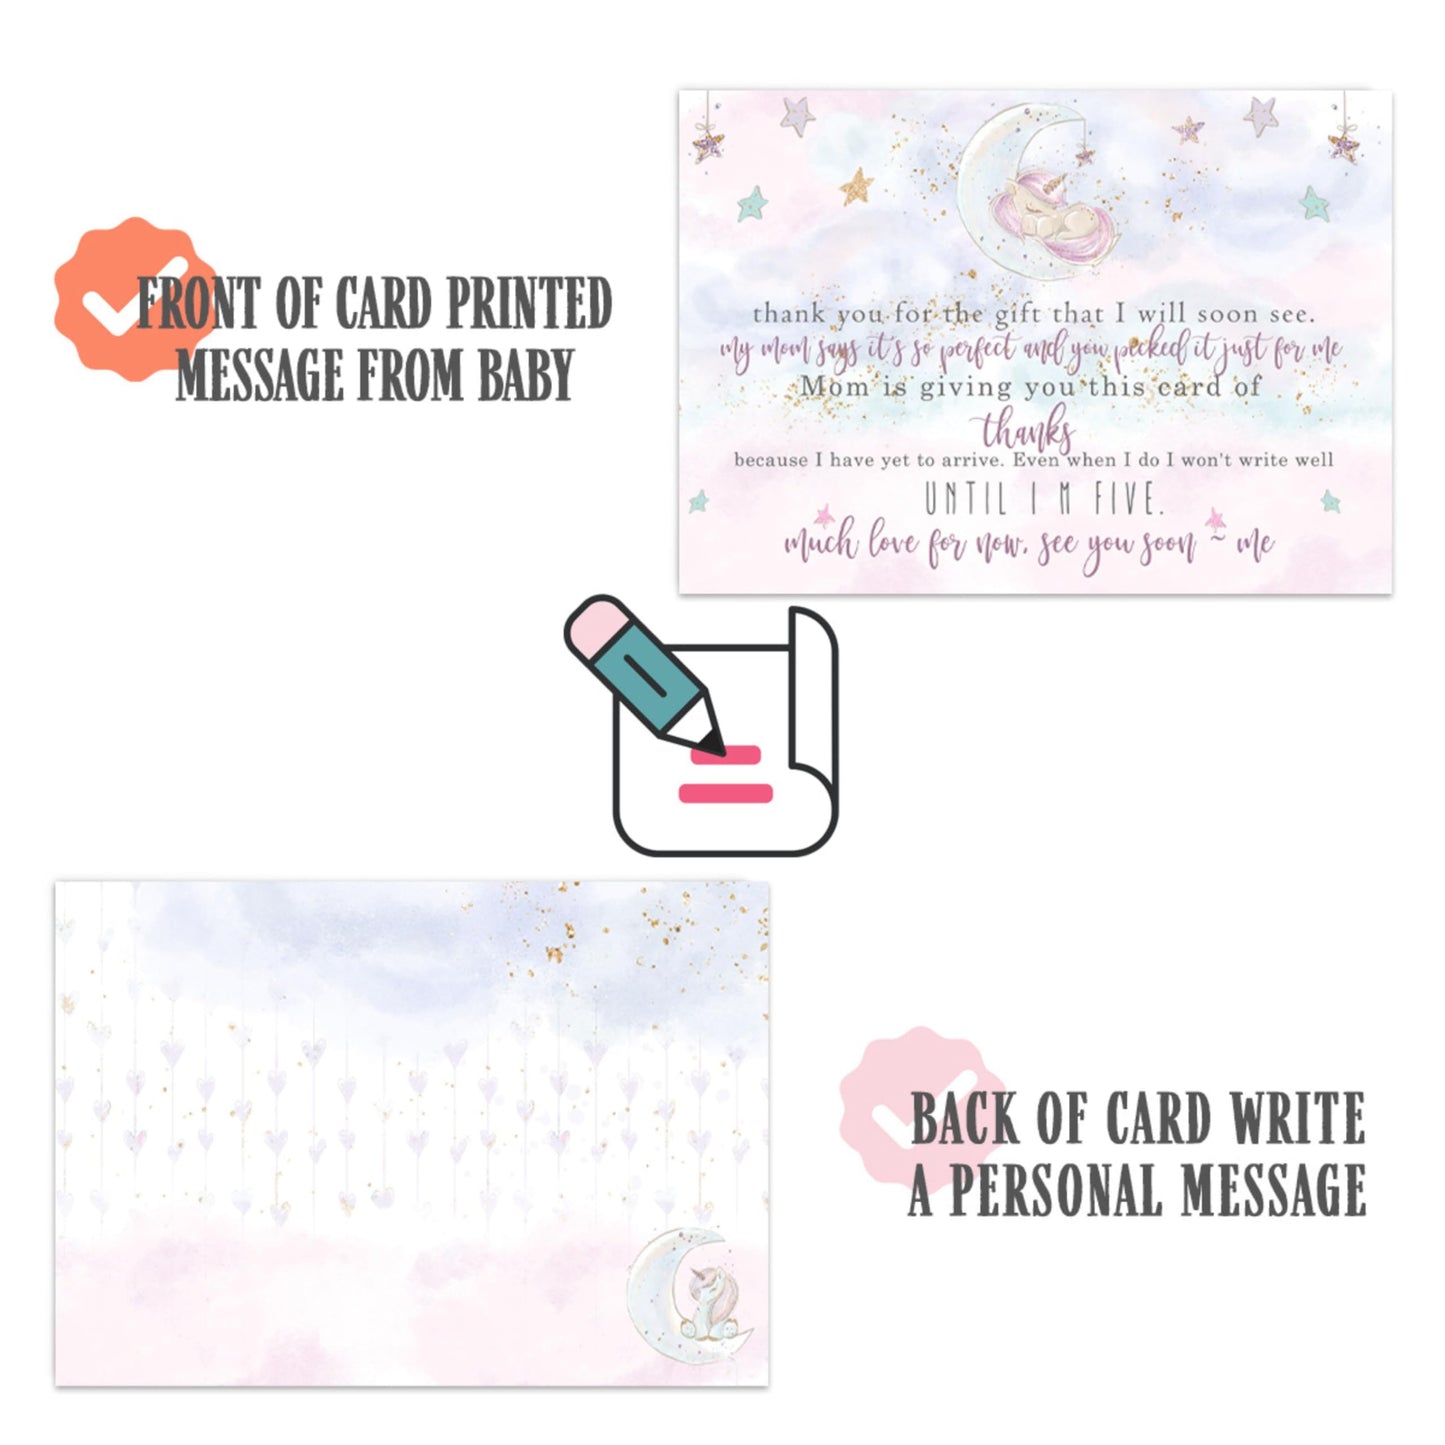 Moon Stationery Set 4x6, 25 Pack PrintedPaper Clever Party